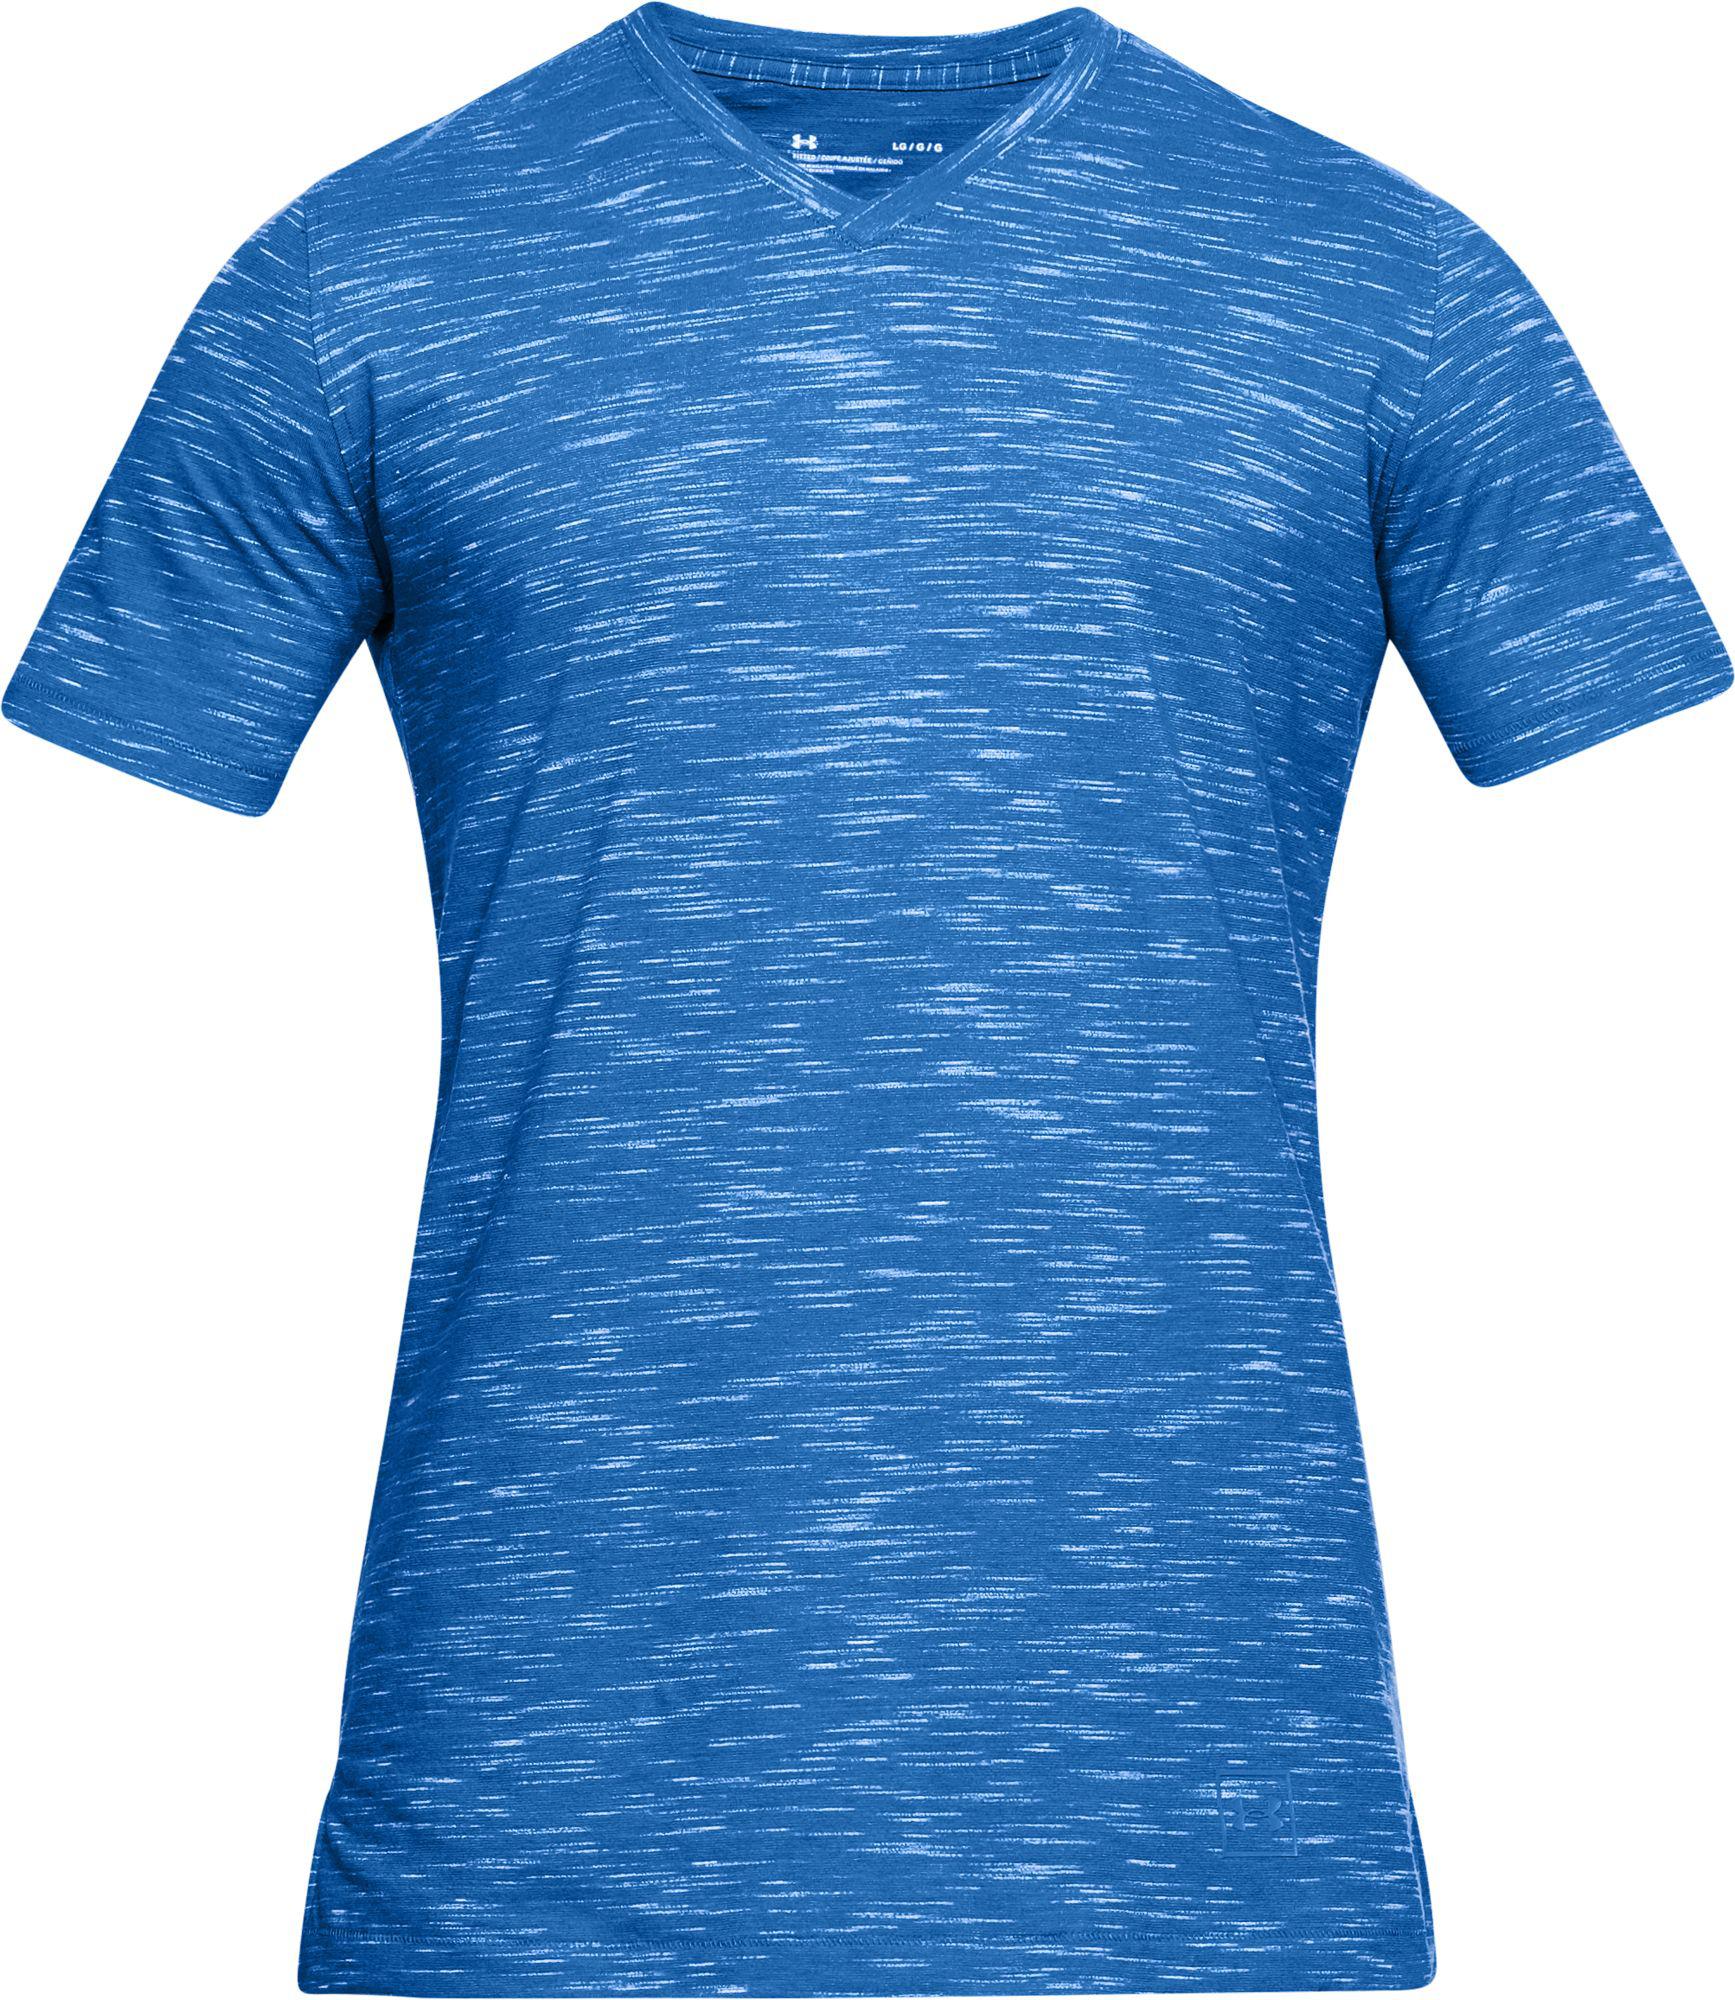 under armour sportstyle core v neck